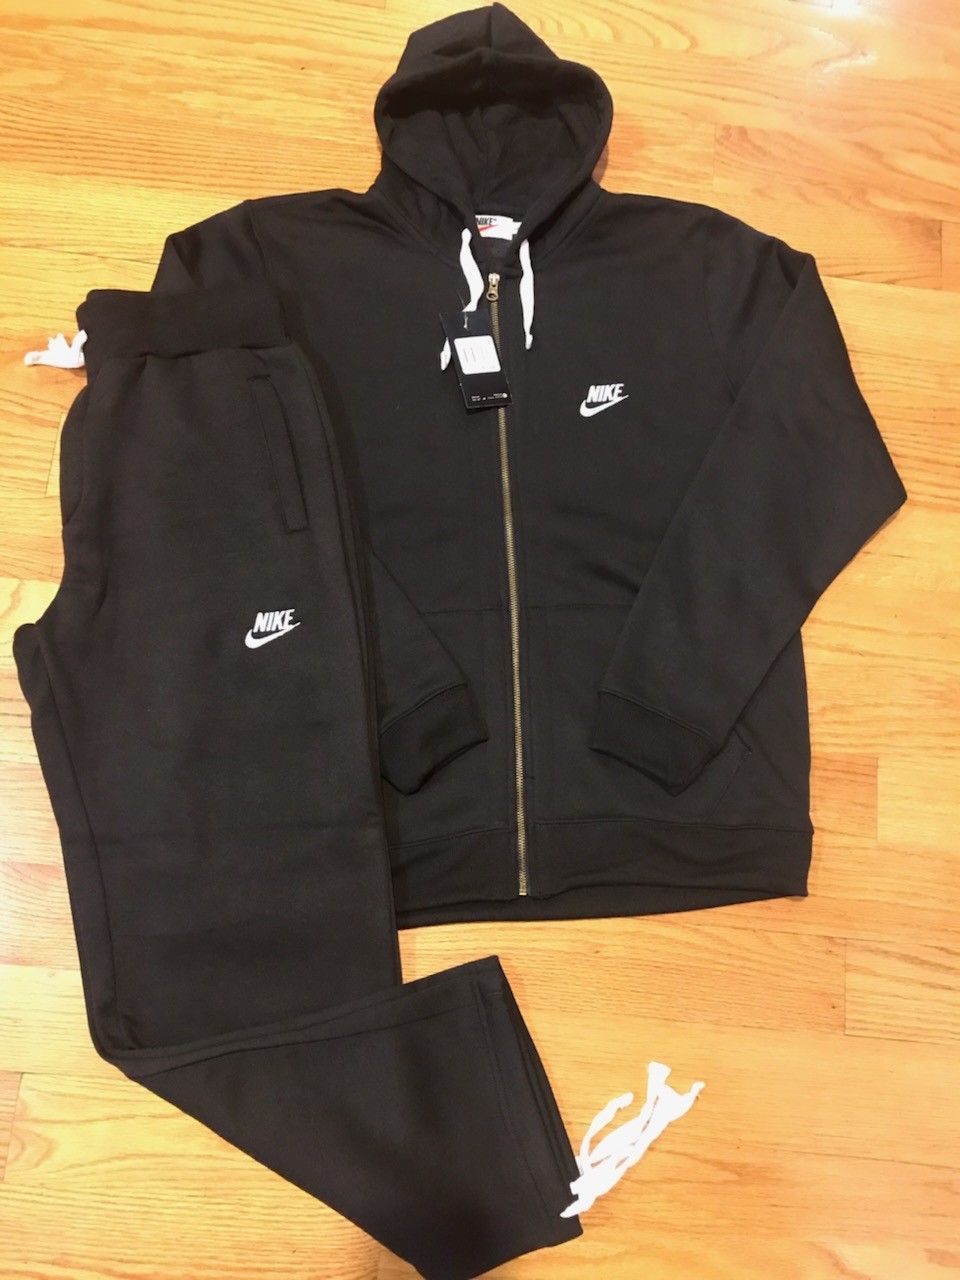 Nike sweat suits